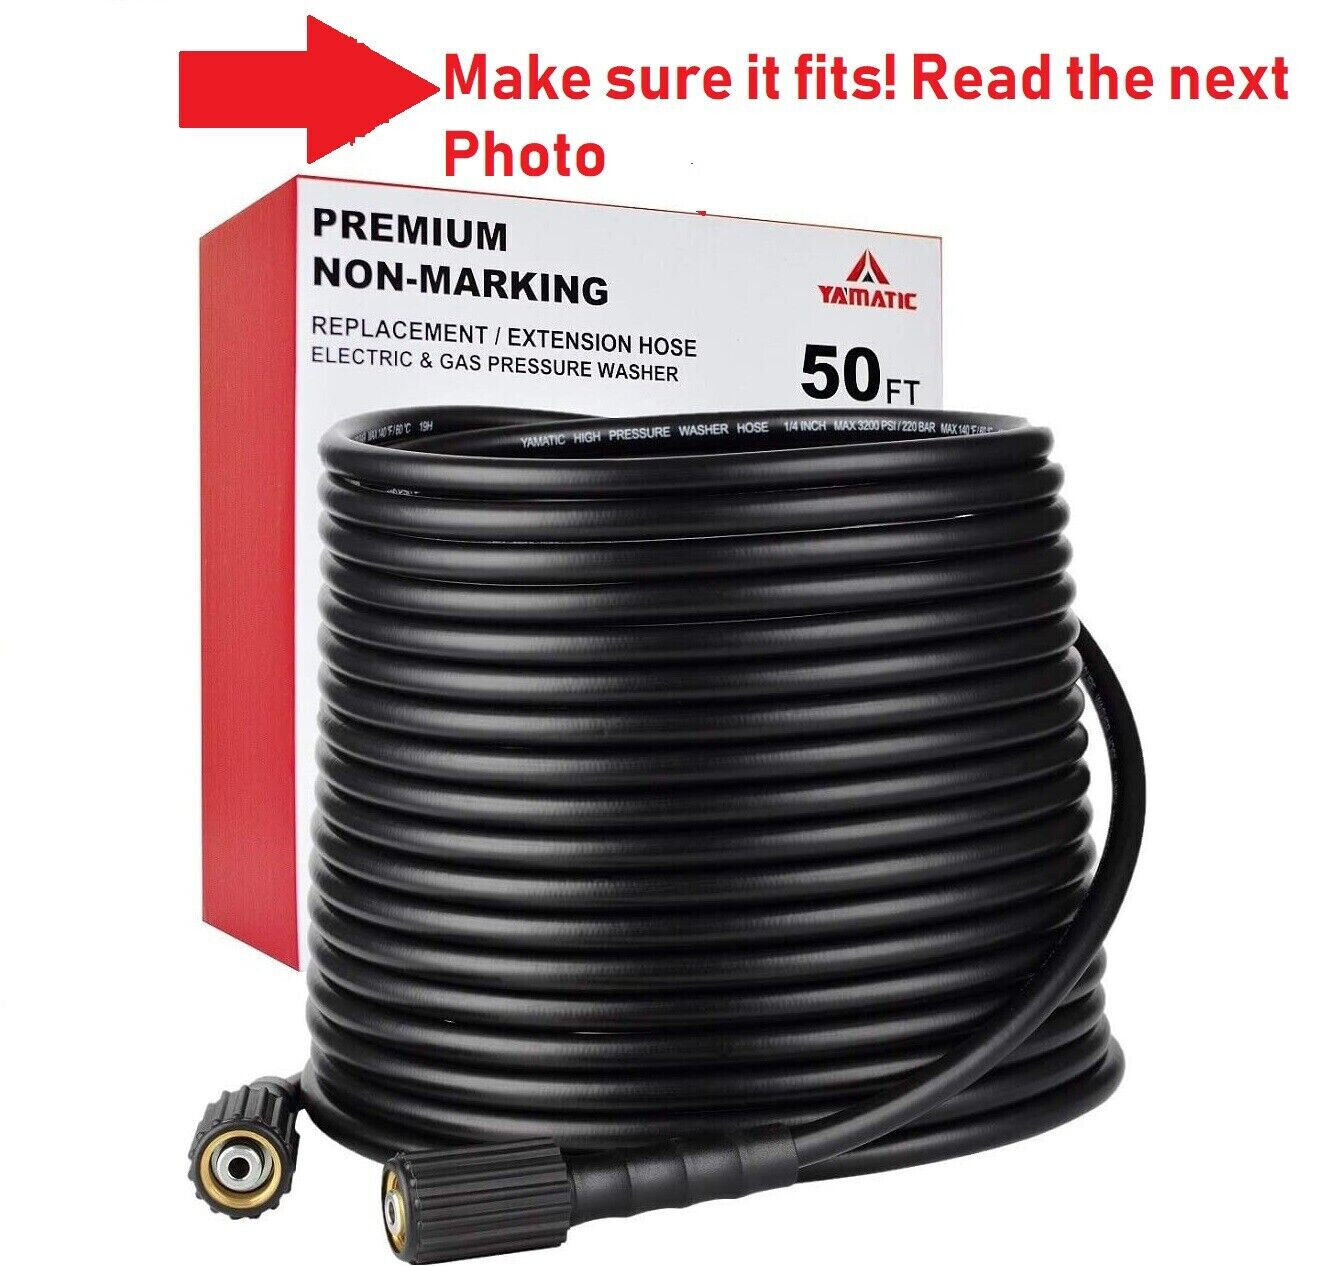 Primary image for 50ft Premium Non-marking Extension Hose Electric Gas Pressure Washer 3200psi (C8